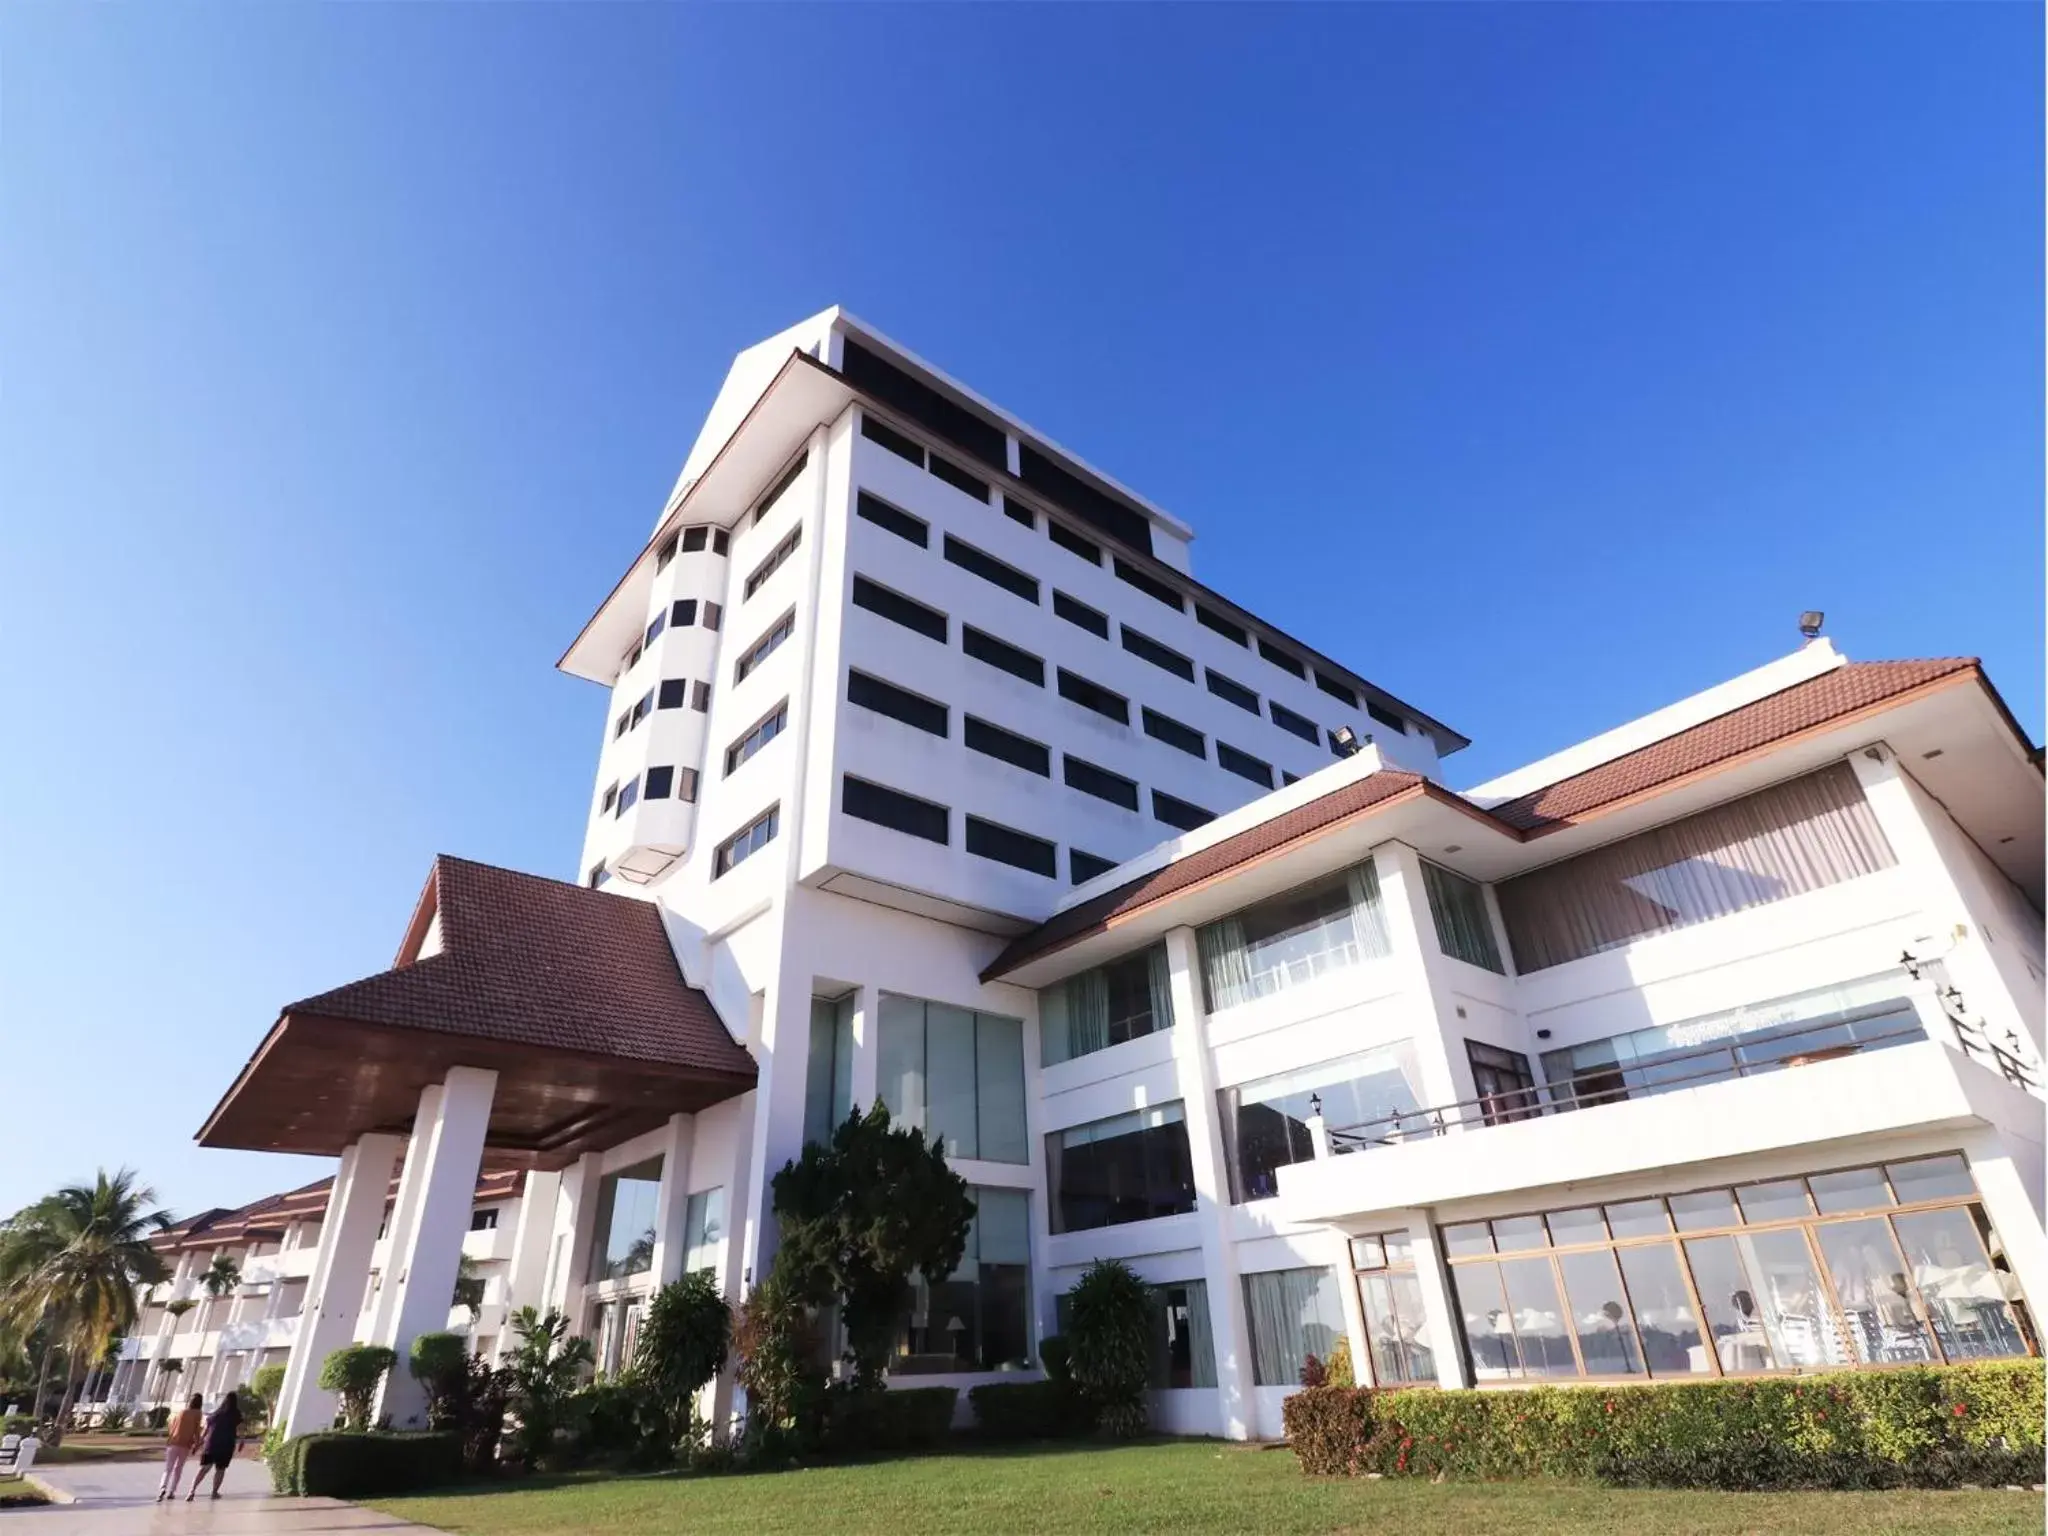 Property building in Fortune River View Hotel Nakhon Phanom